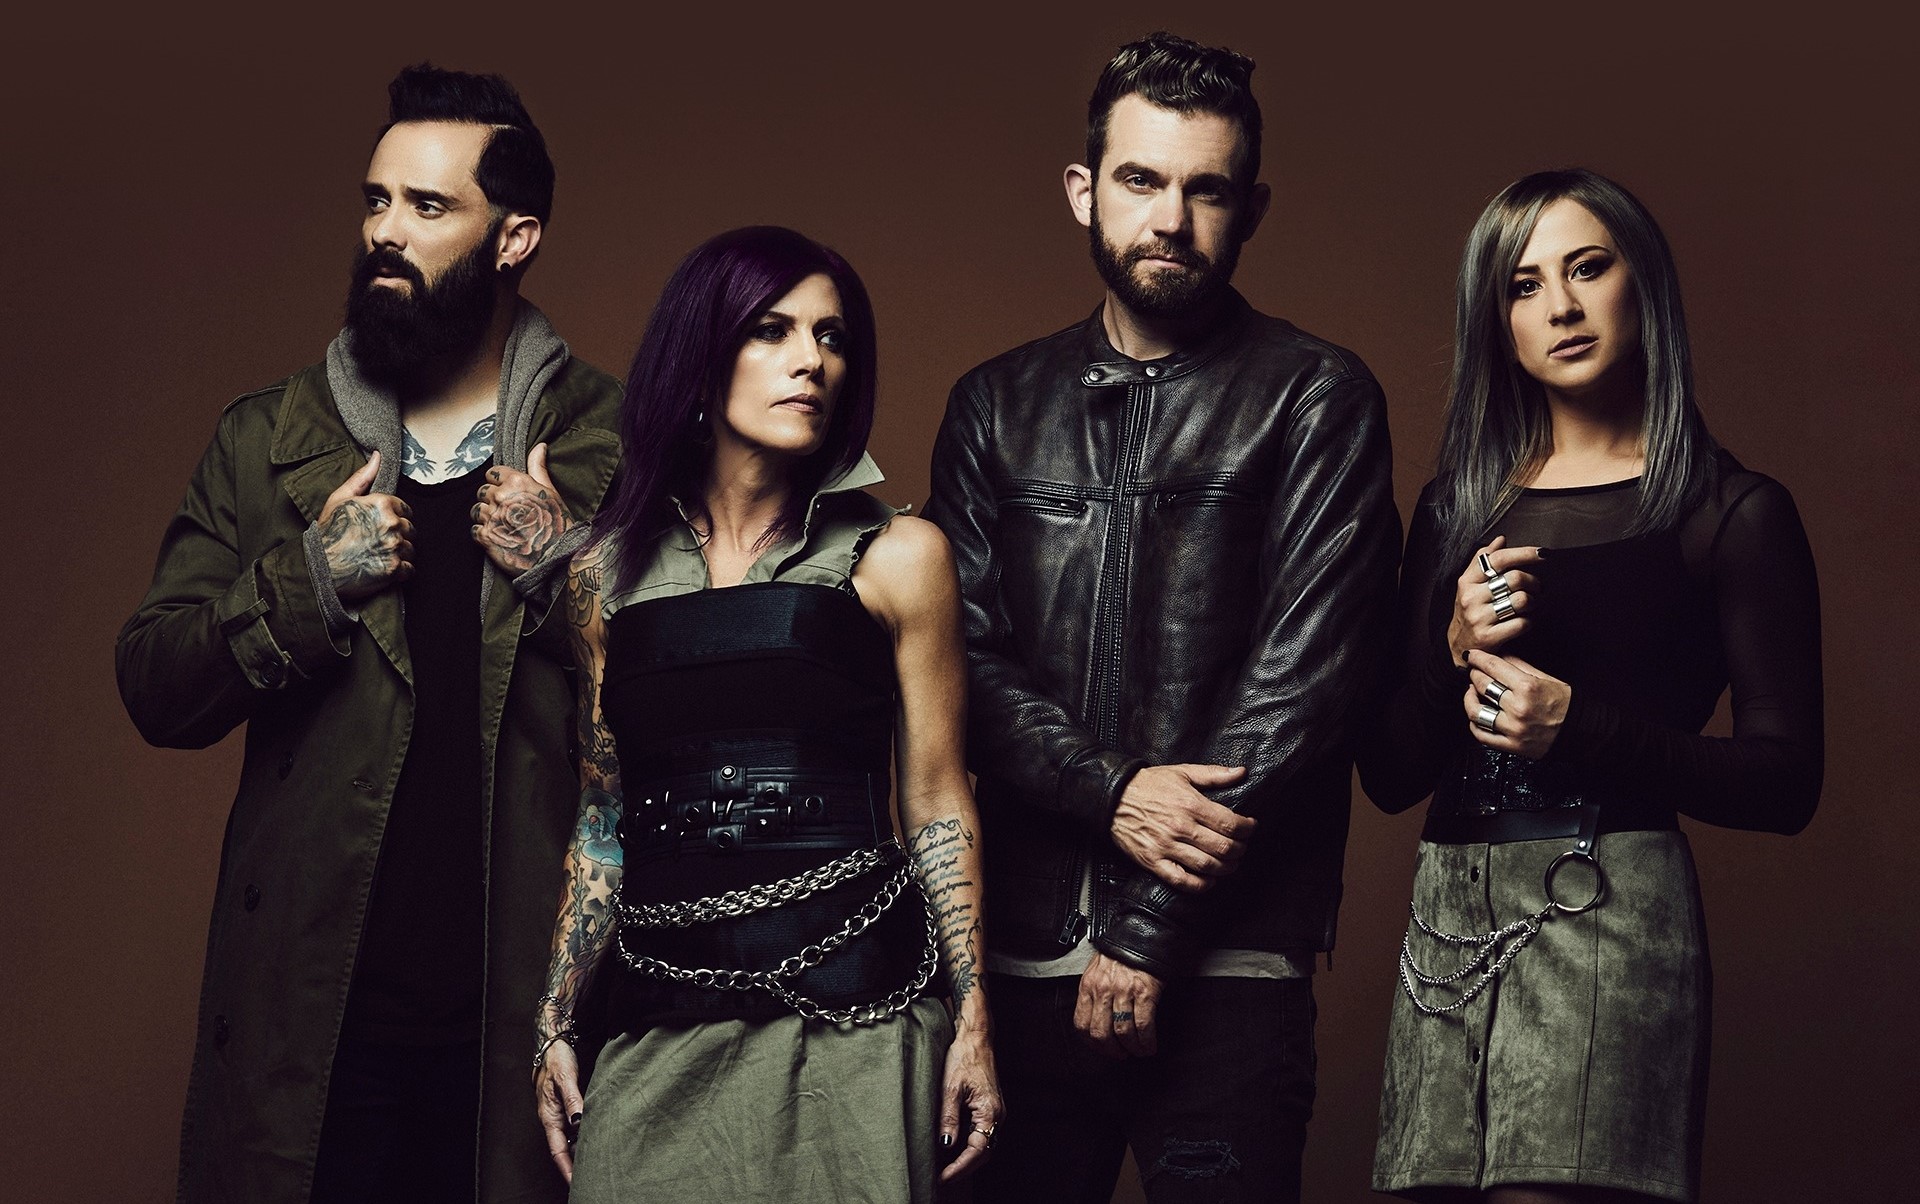 Skillet announce 2023 European Tour includes Manchester on the 14th